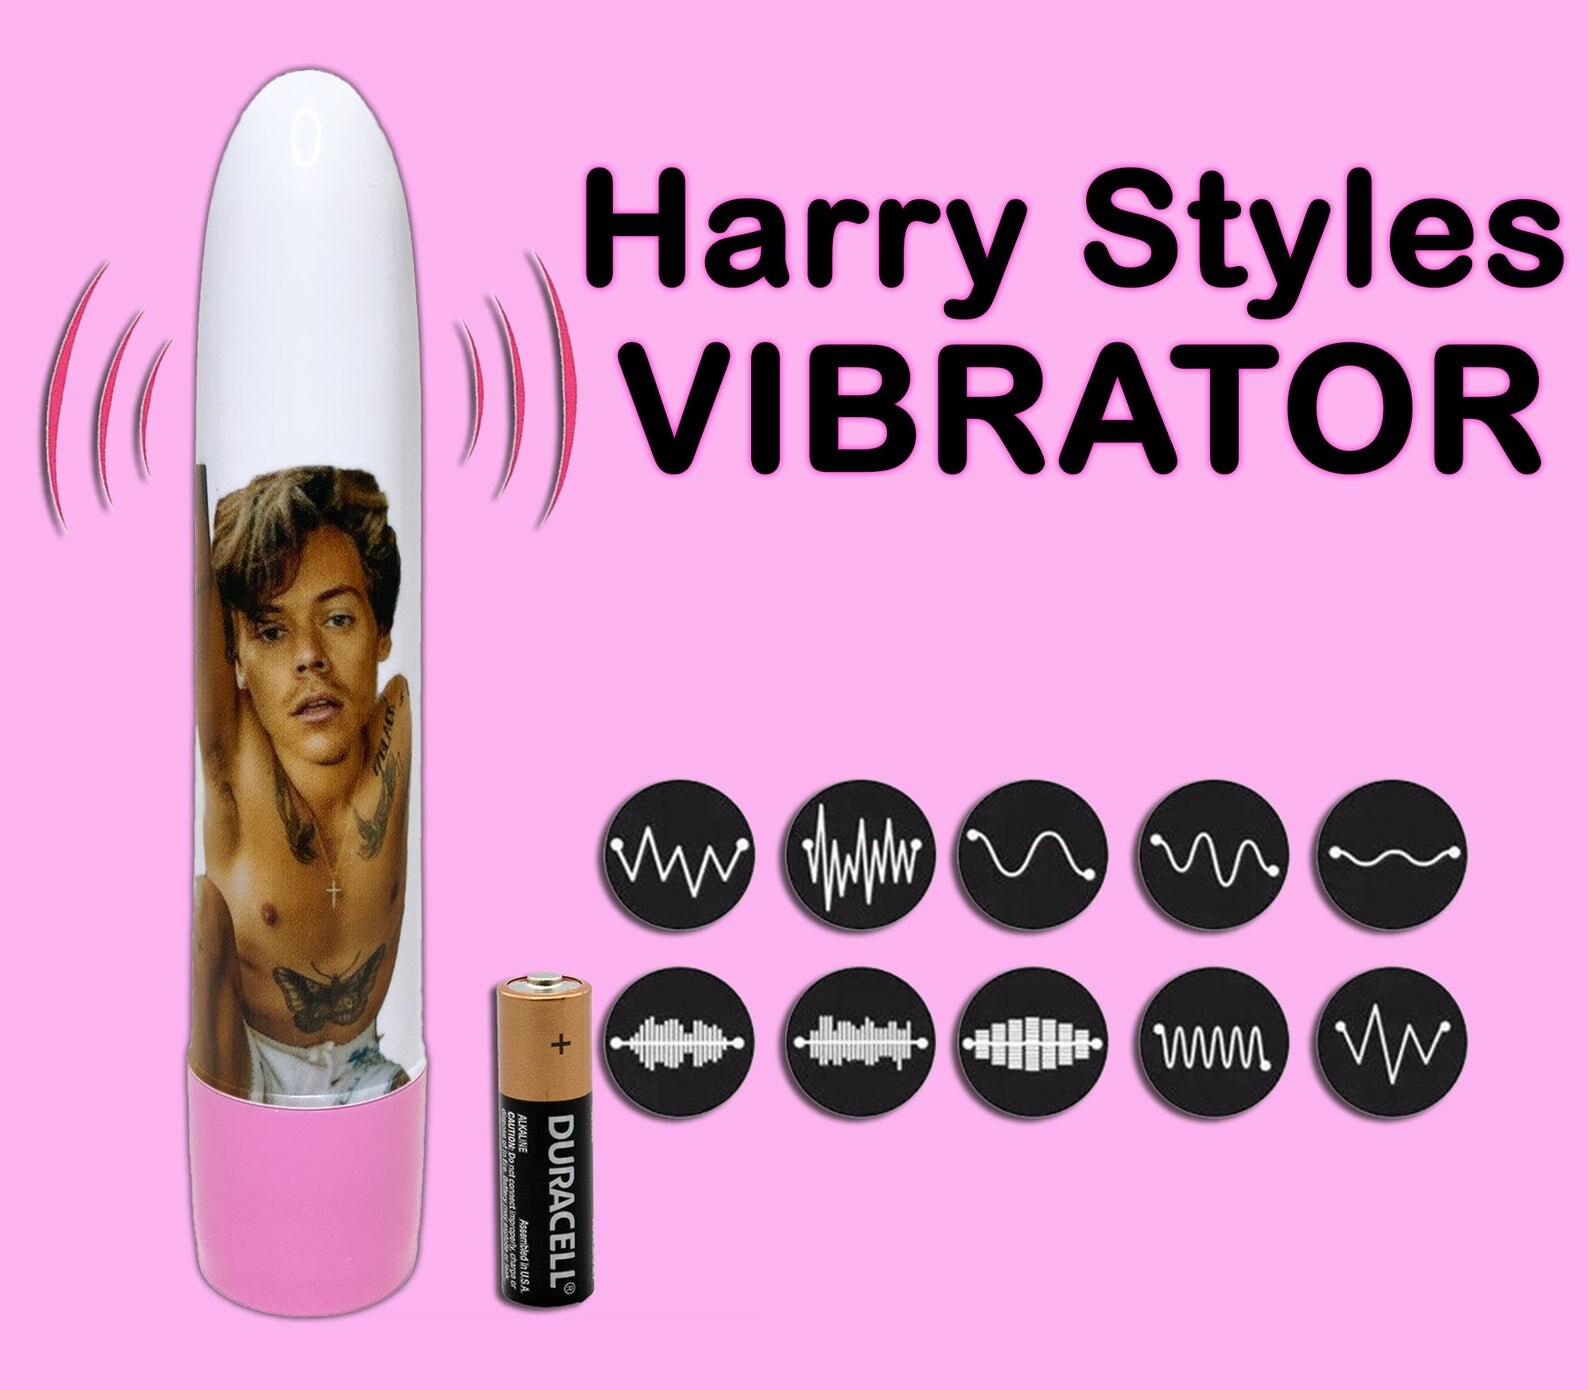 Vibrator is this girl's best friend